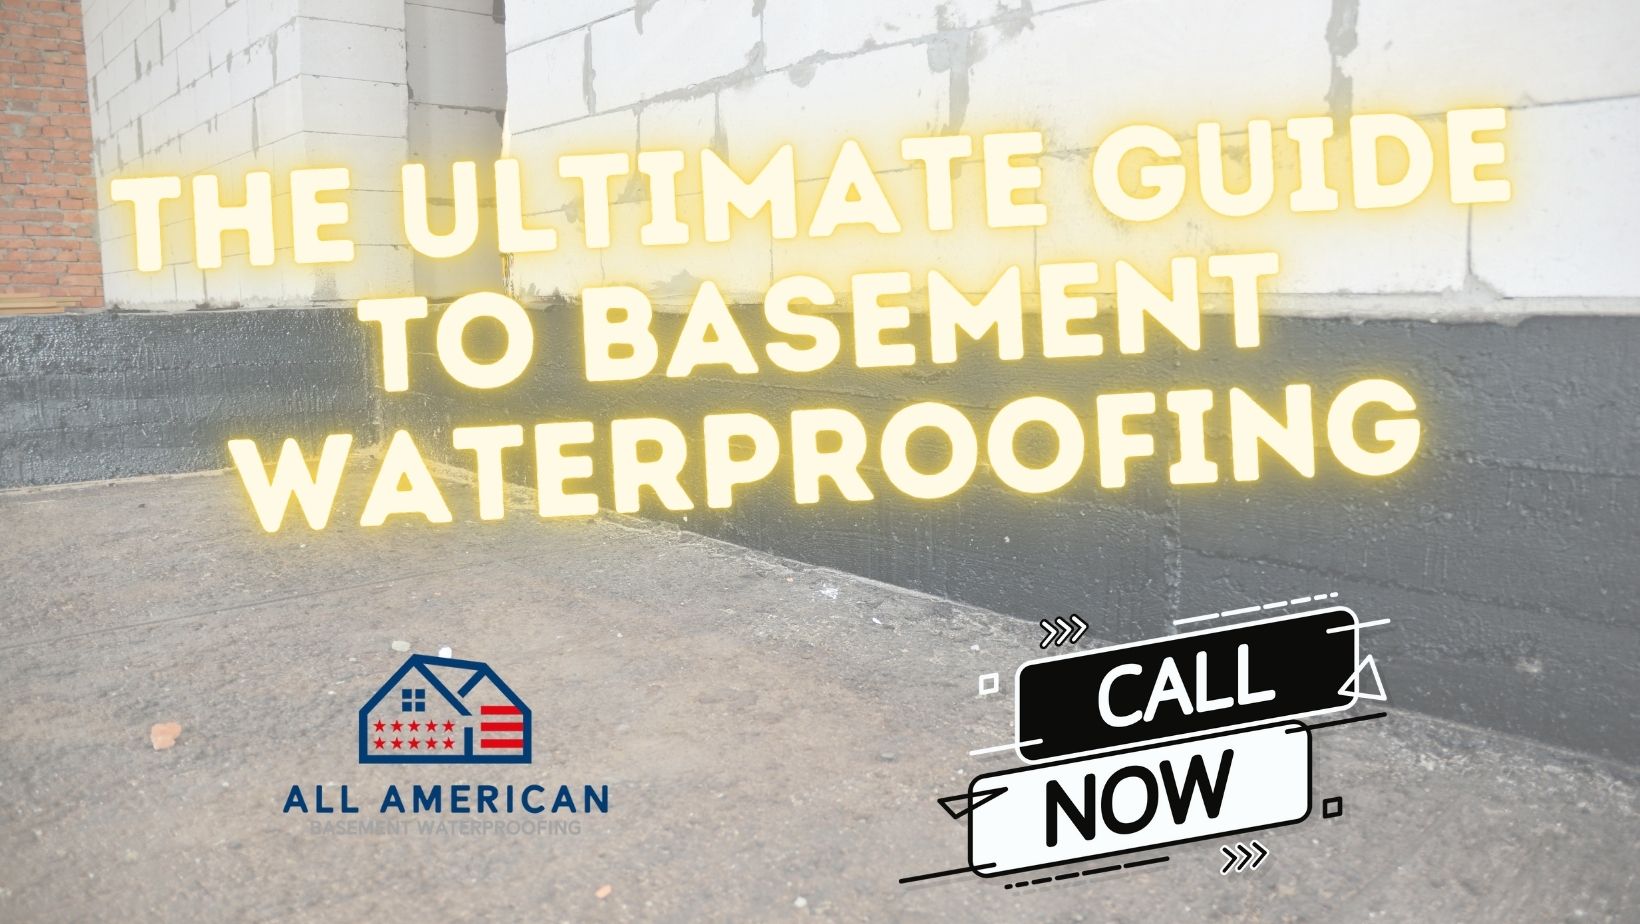 The Ultimate Guide to Basement Waterproofing